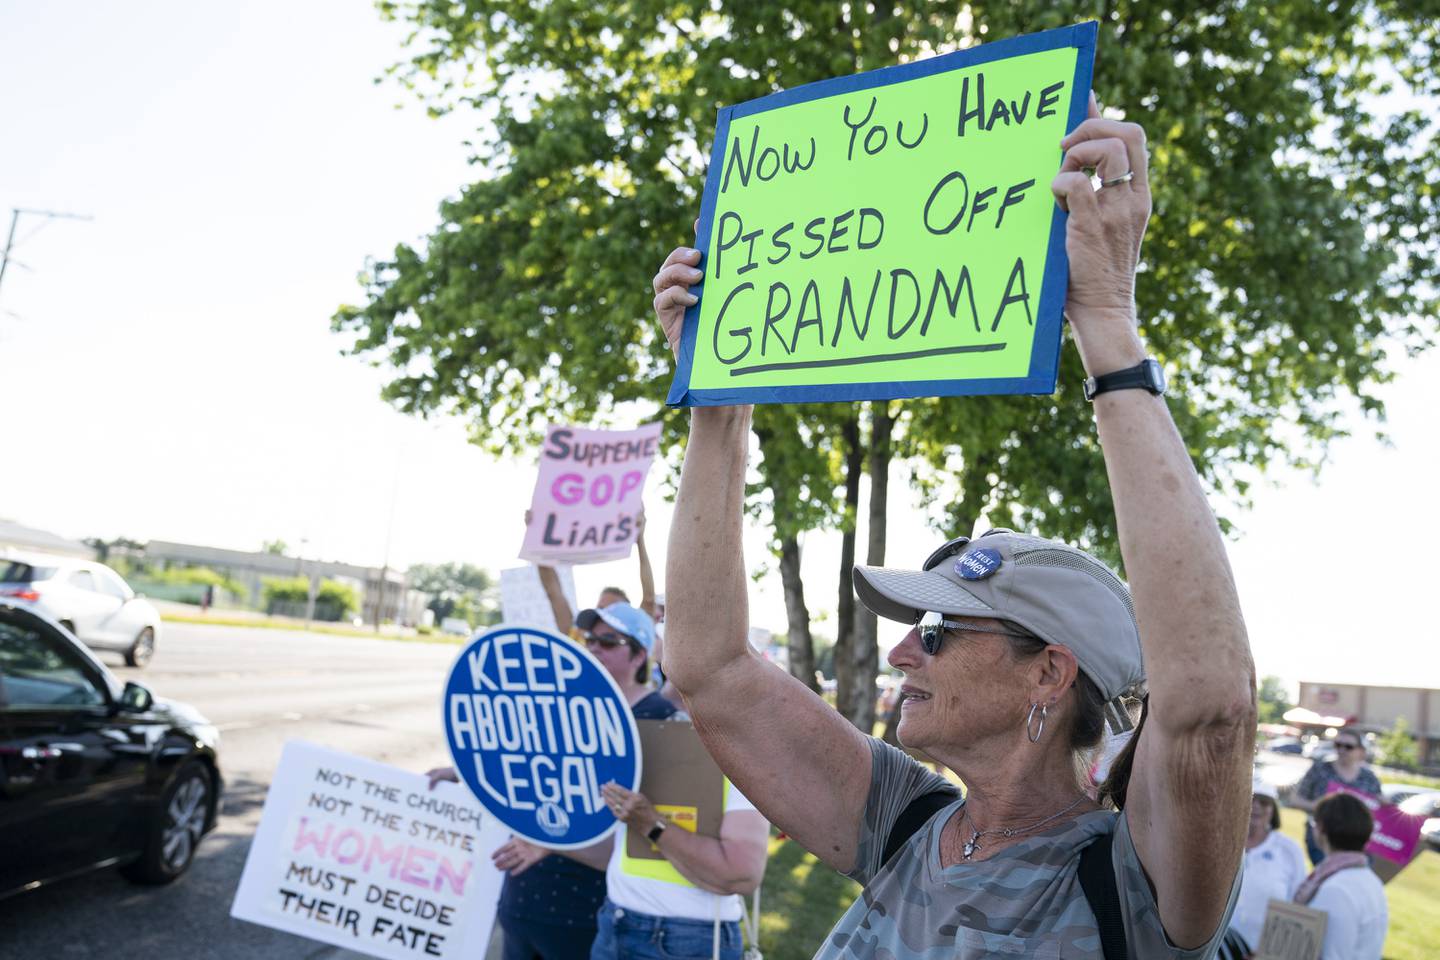 Jennifer Galloway, of Huntley, holds a sign for passing traffic during a protest Friday, June 24, 2022, over the overturning of Roe v. Wade, organized by the McHenry County National Organization for Women. On Friday, the U.S. Supreme Court overturned the decades-old ruling that upheld the right to an abortion.